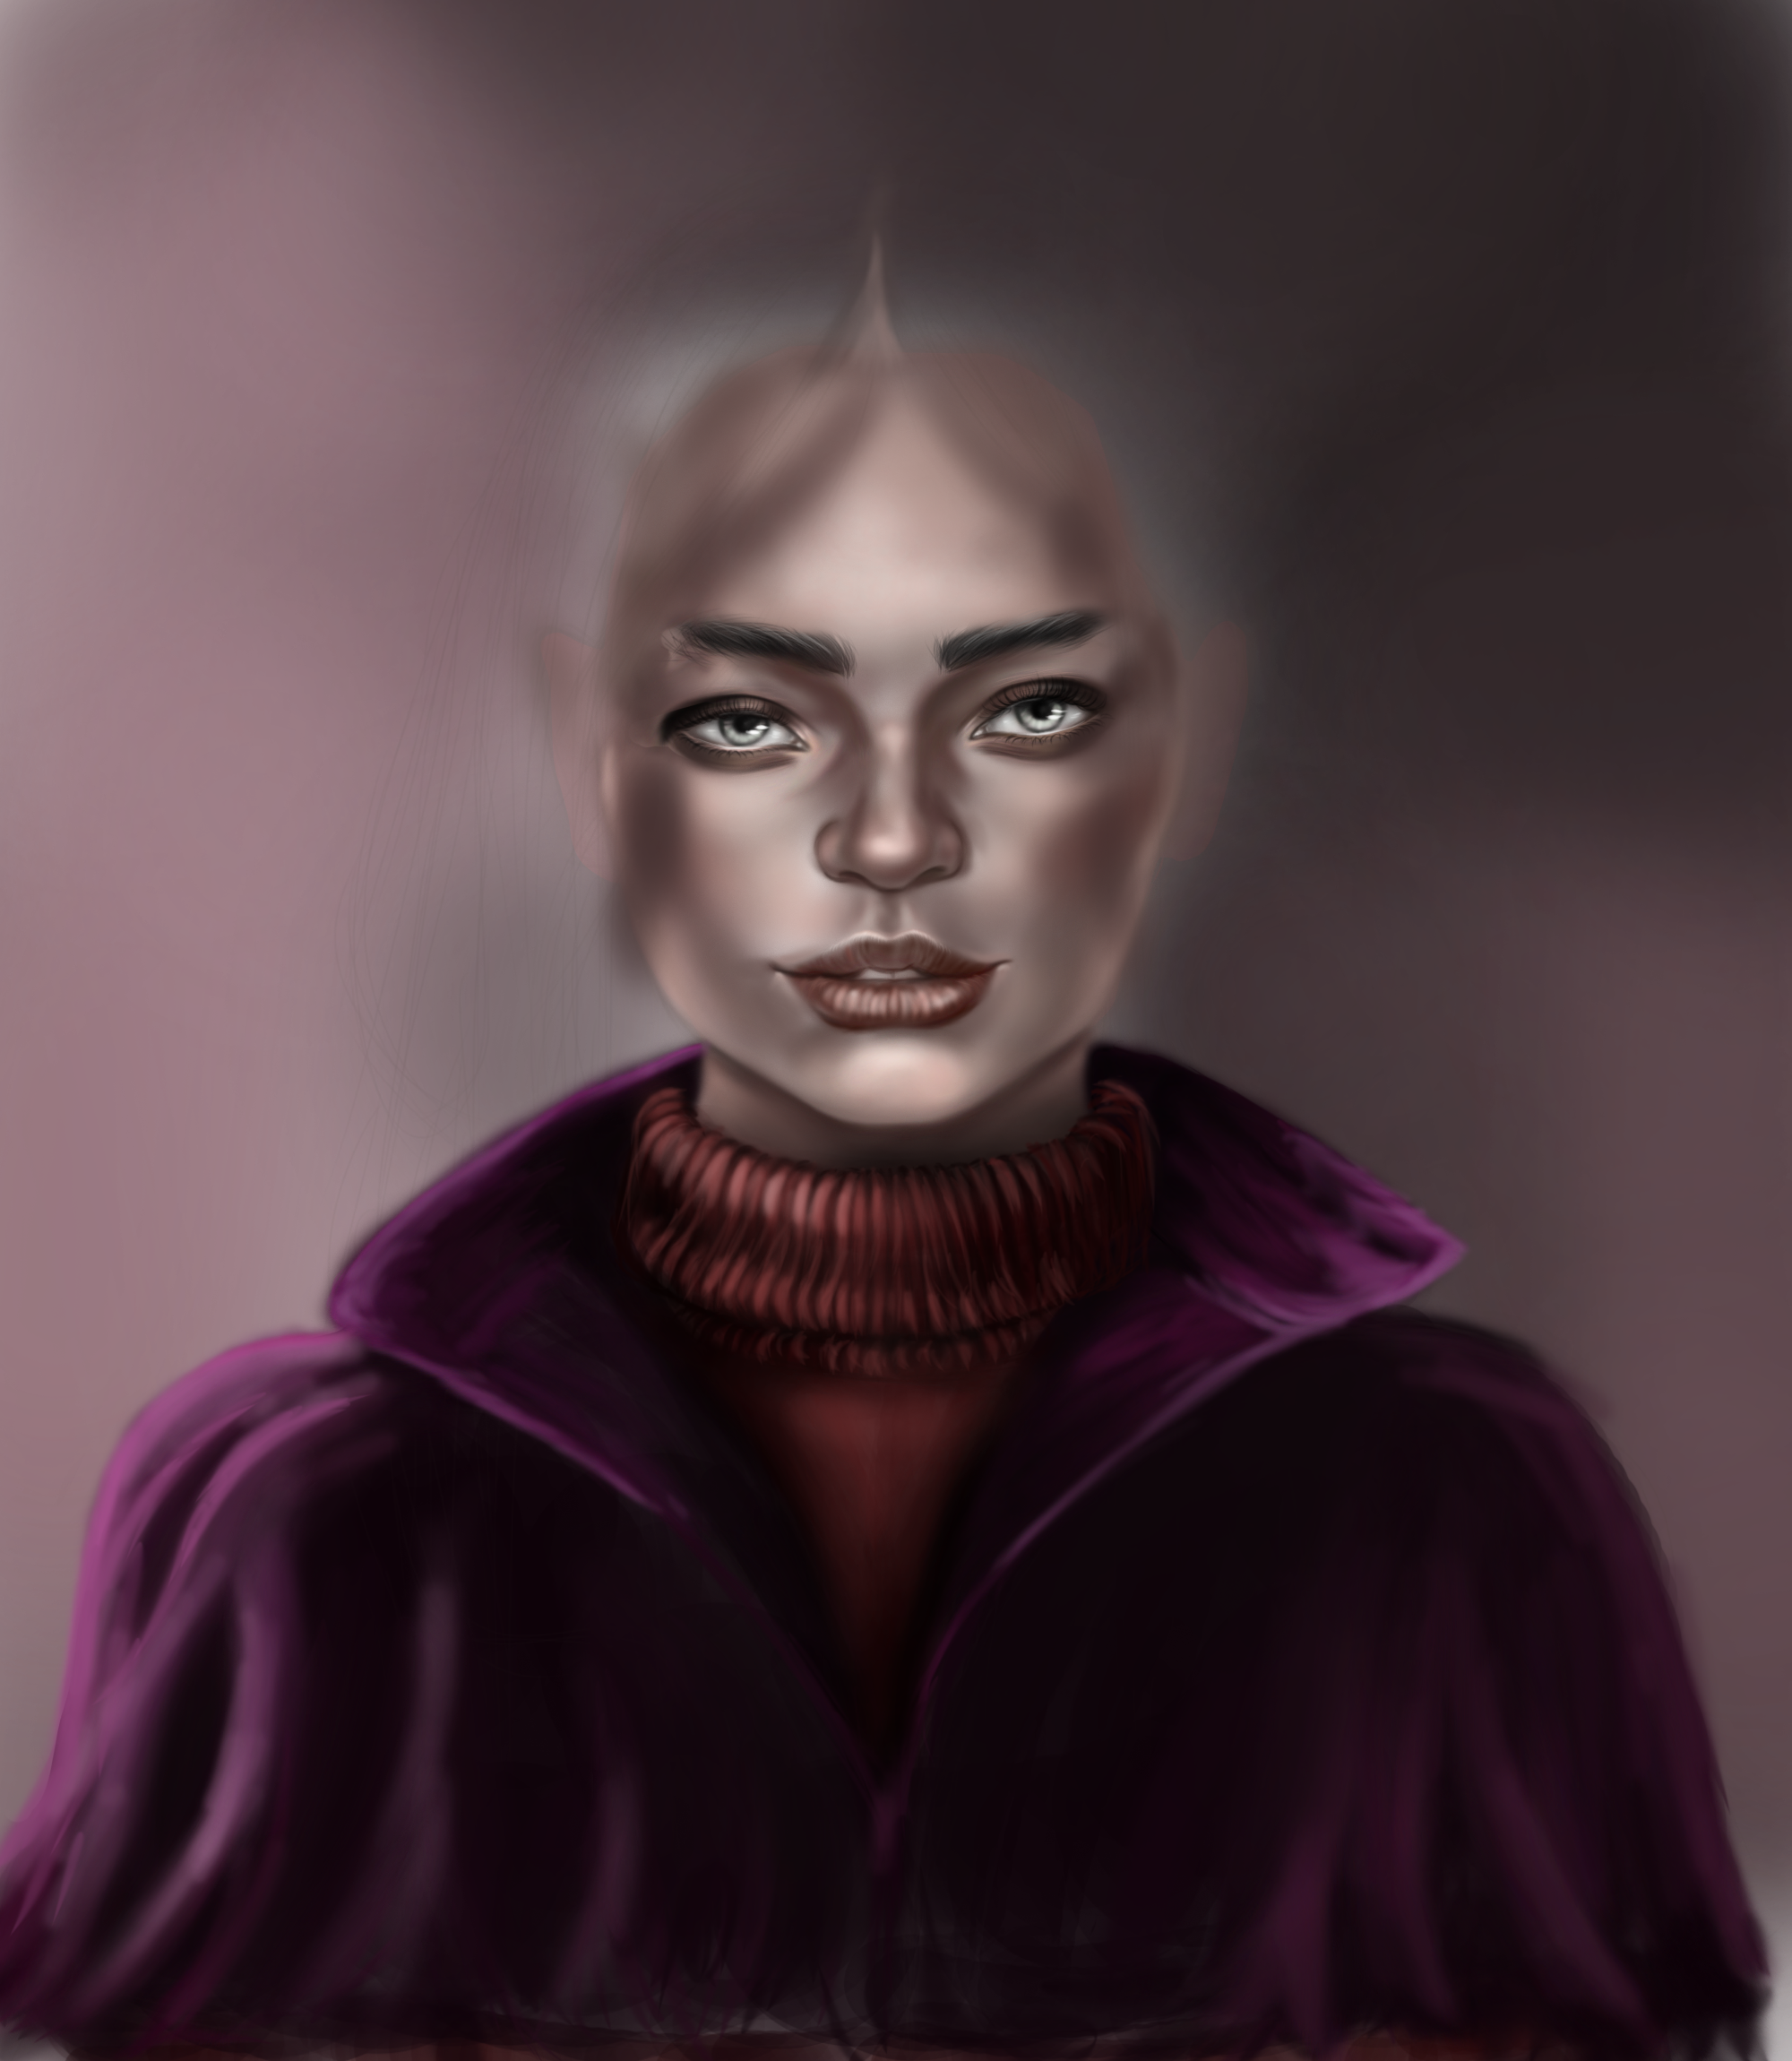 Francisftlp-Digital Drawing She Mysterious- Step 4.png